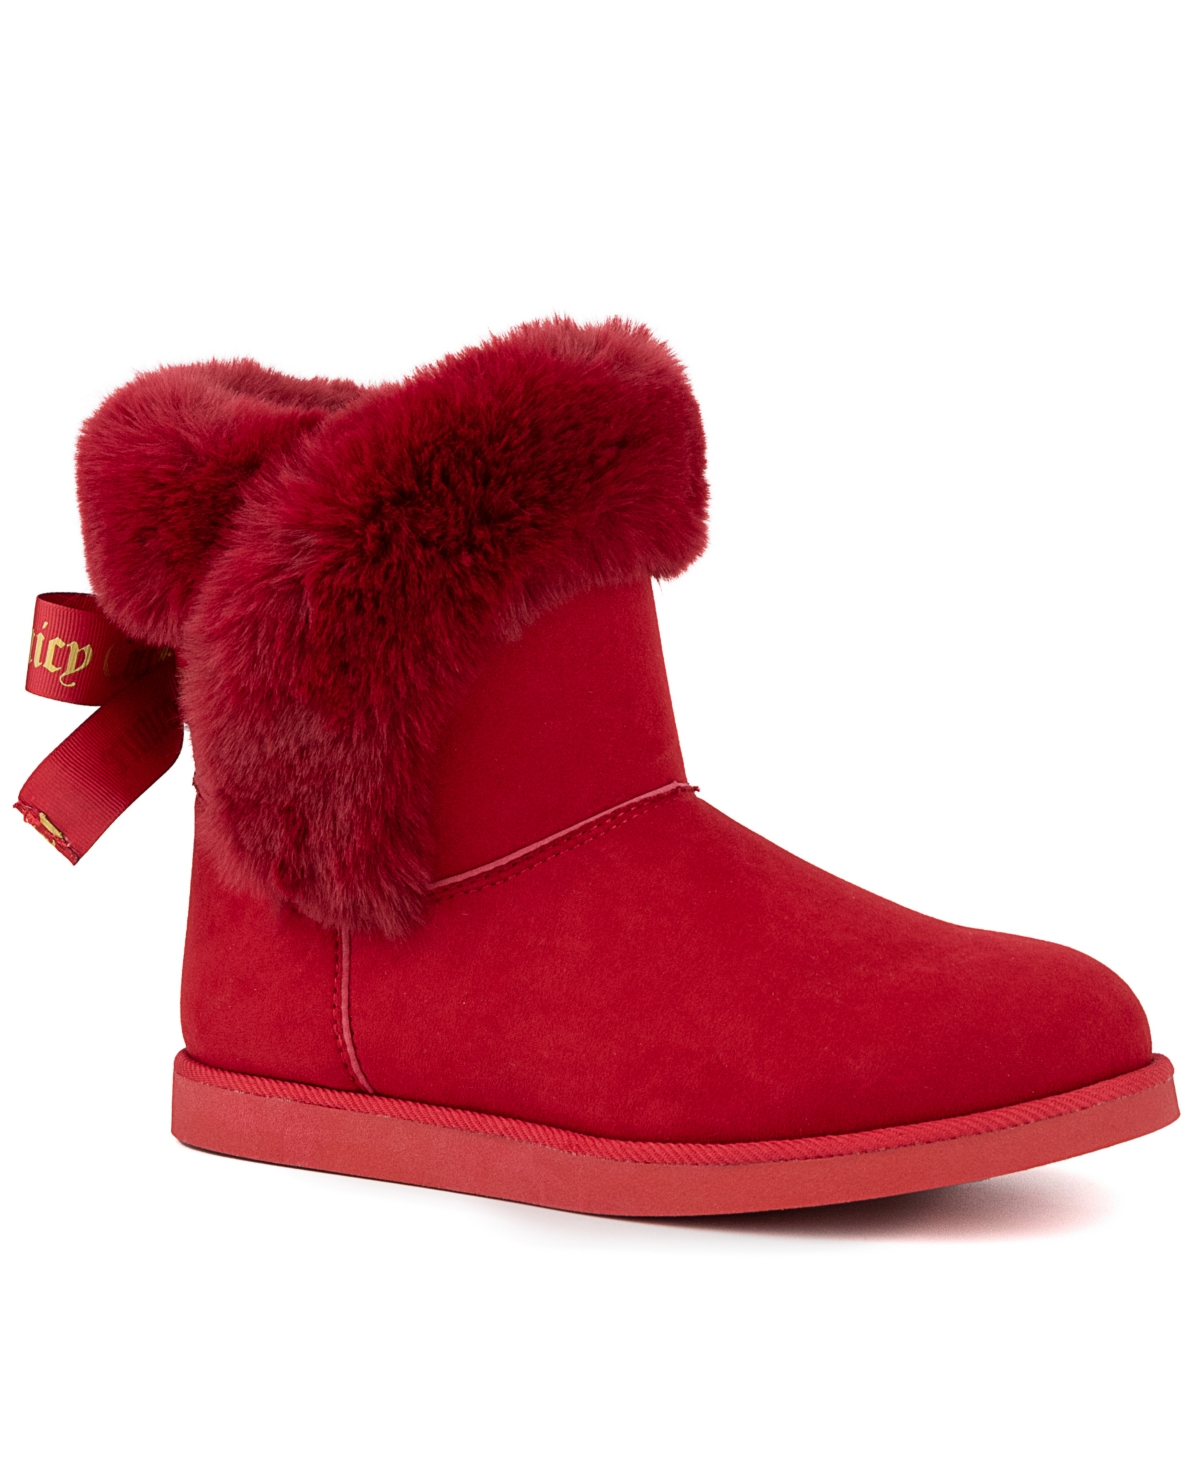 Women's King Winter Boots - Red Microsuede, Faux Fur